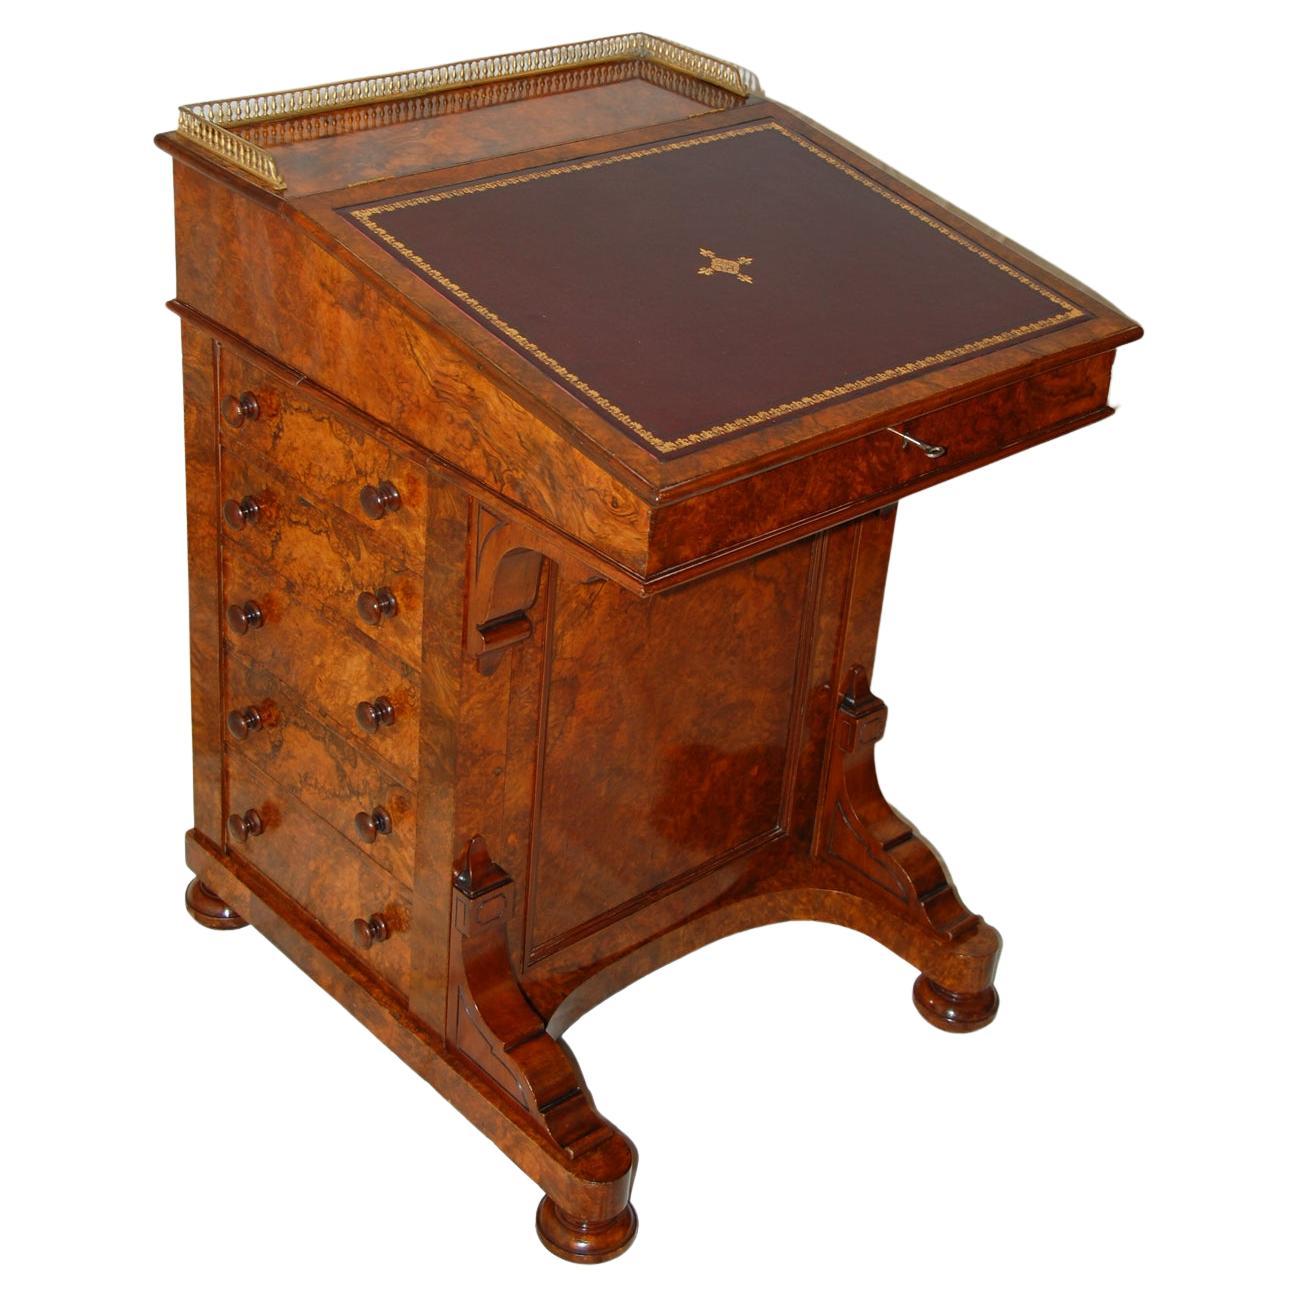 English Mid-19th Century Burl Walnut Davenport Desk with Leathered Writing Slope For Sale